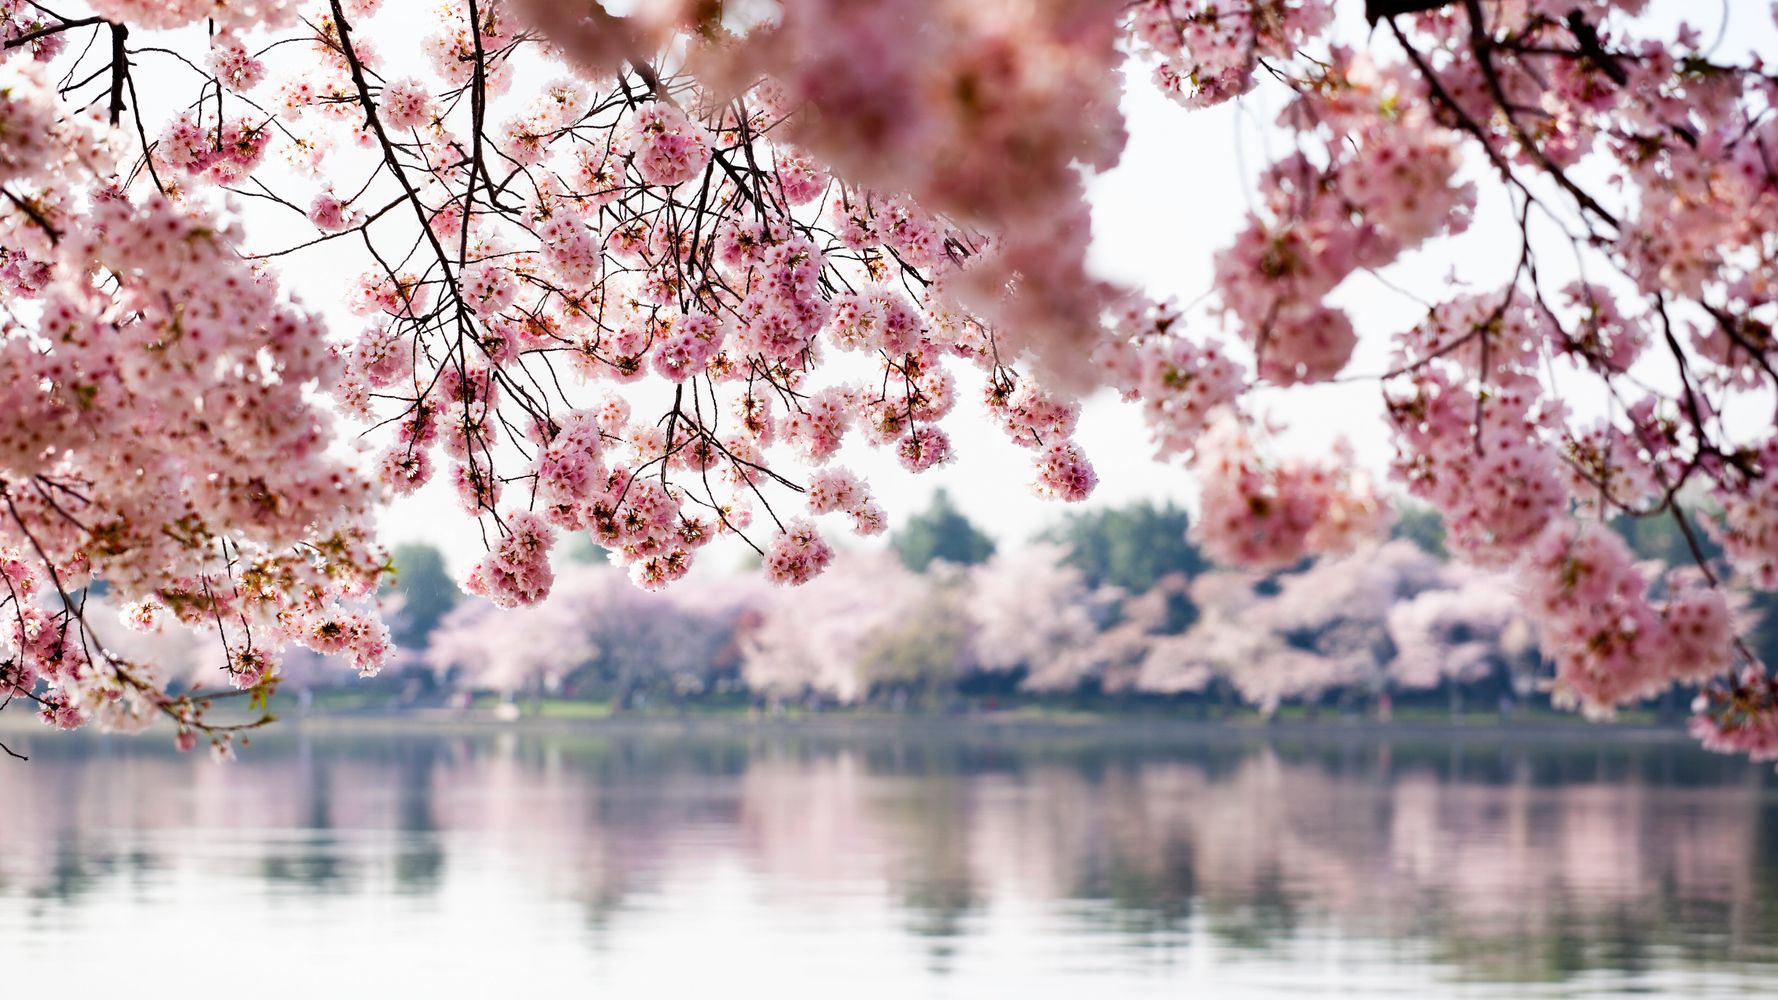 Japan's and Washington's cherry trees blossom earlier, thanks to